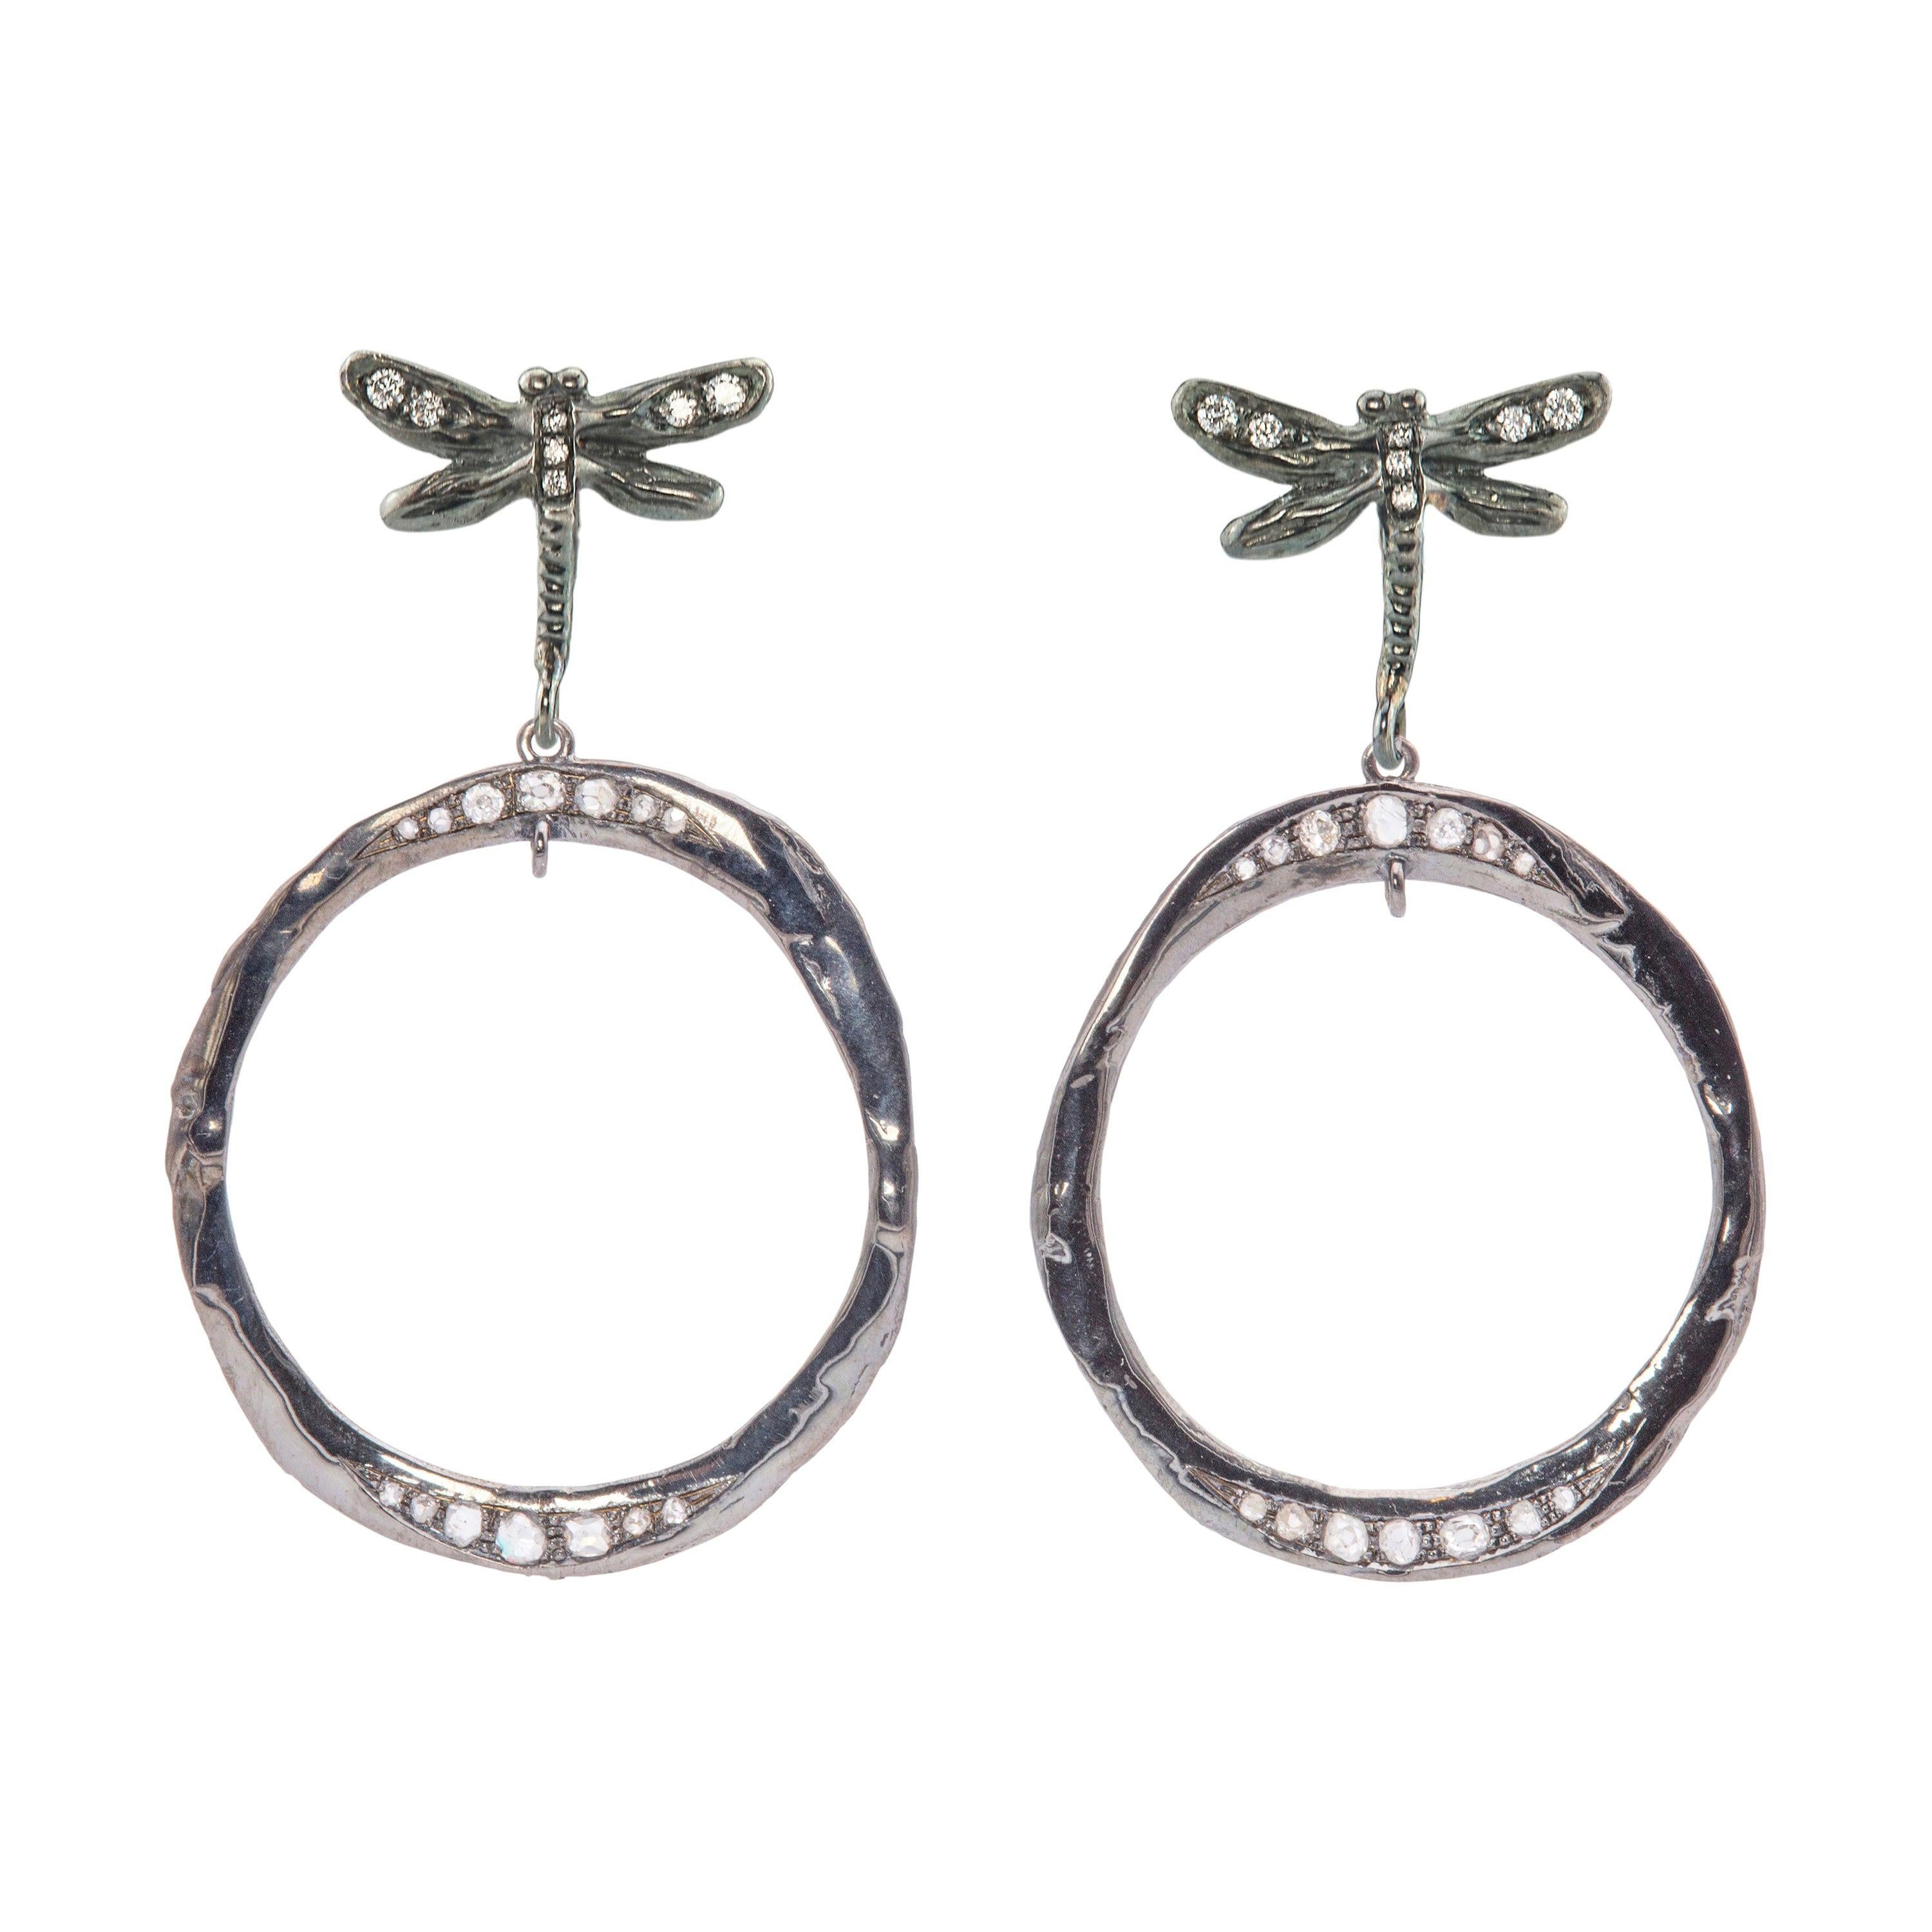 Unique Piece Rossella Ugolini Dragonfly Old Mine Old Cut Diamonds Hoops Earrings For Sale